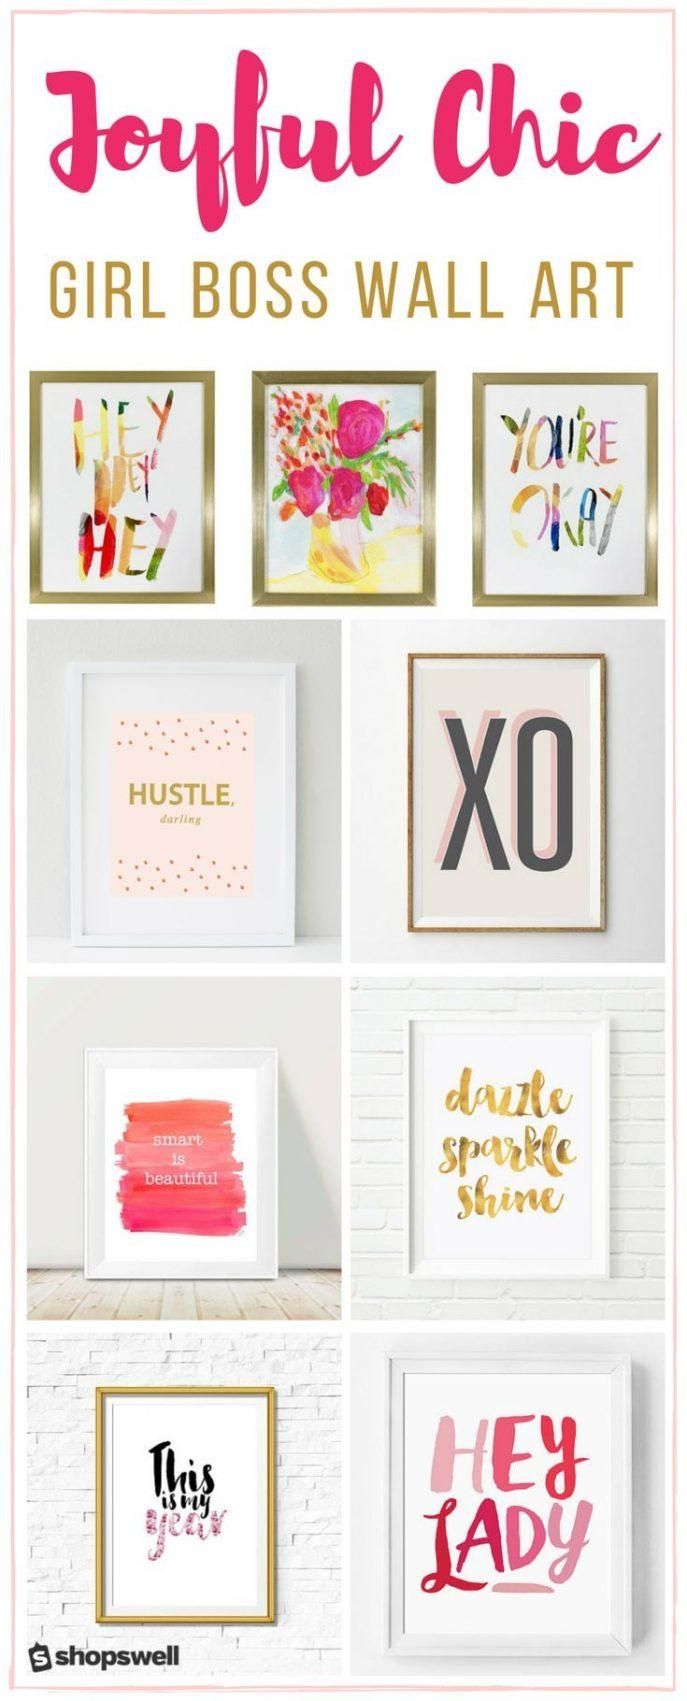 Decor : 57 Stylish Office Wall Art Ideas Office Wall Art Design An With Wall Art For Office Space (View 20 of 20)